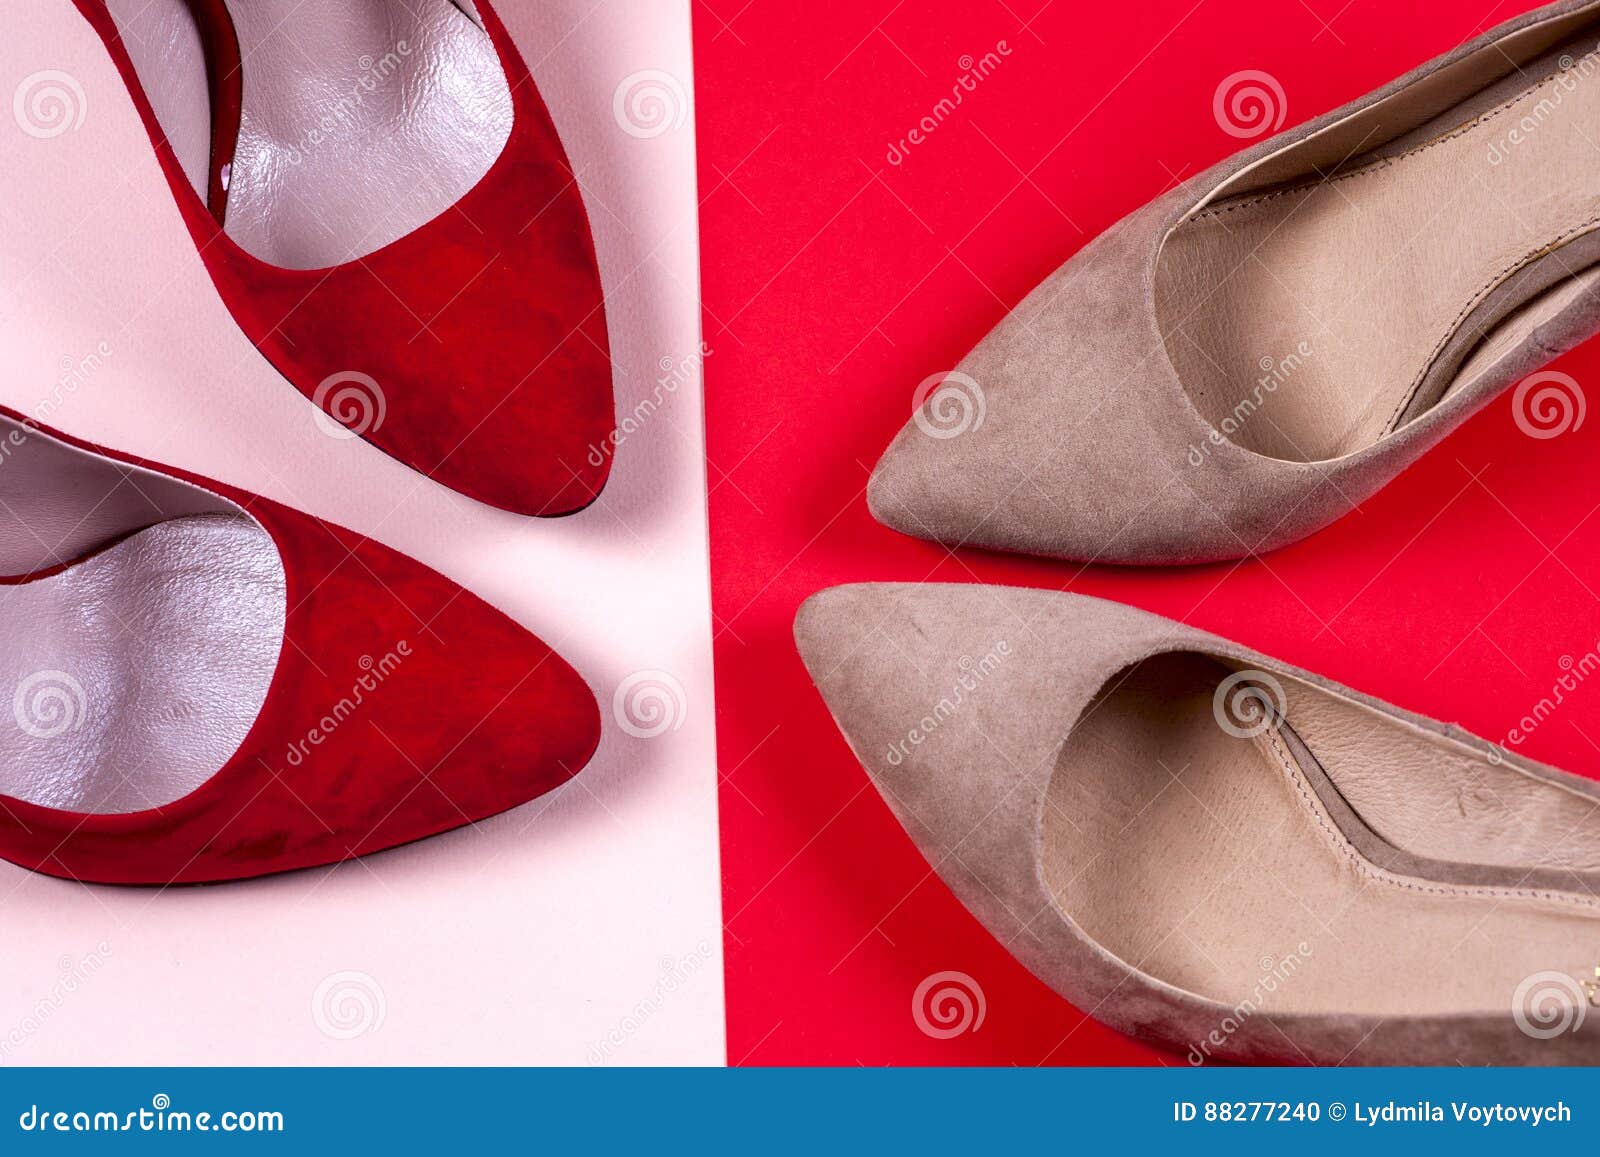 Brides red sole high heels stock image. Image of woman - 30398699